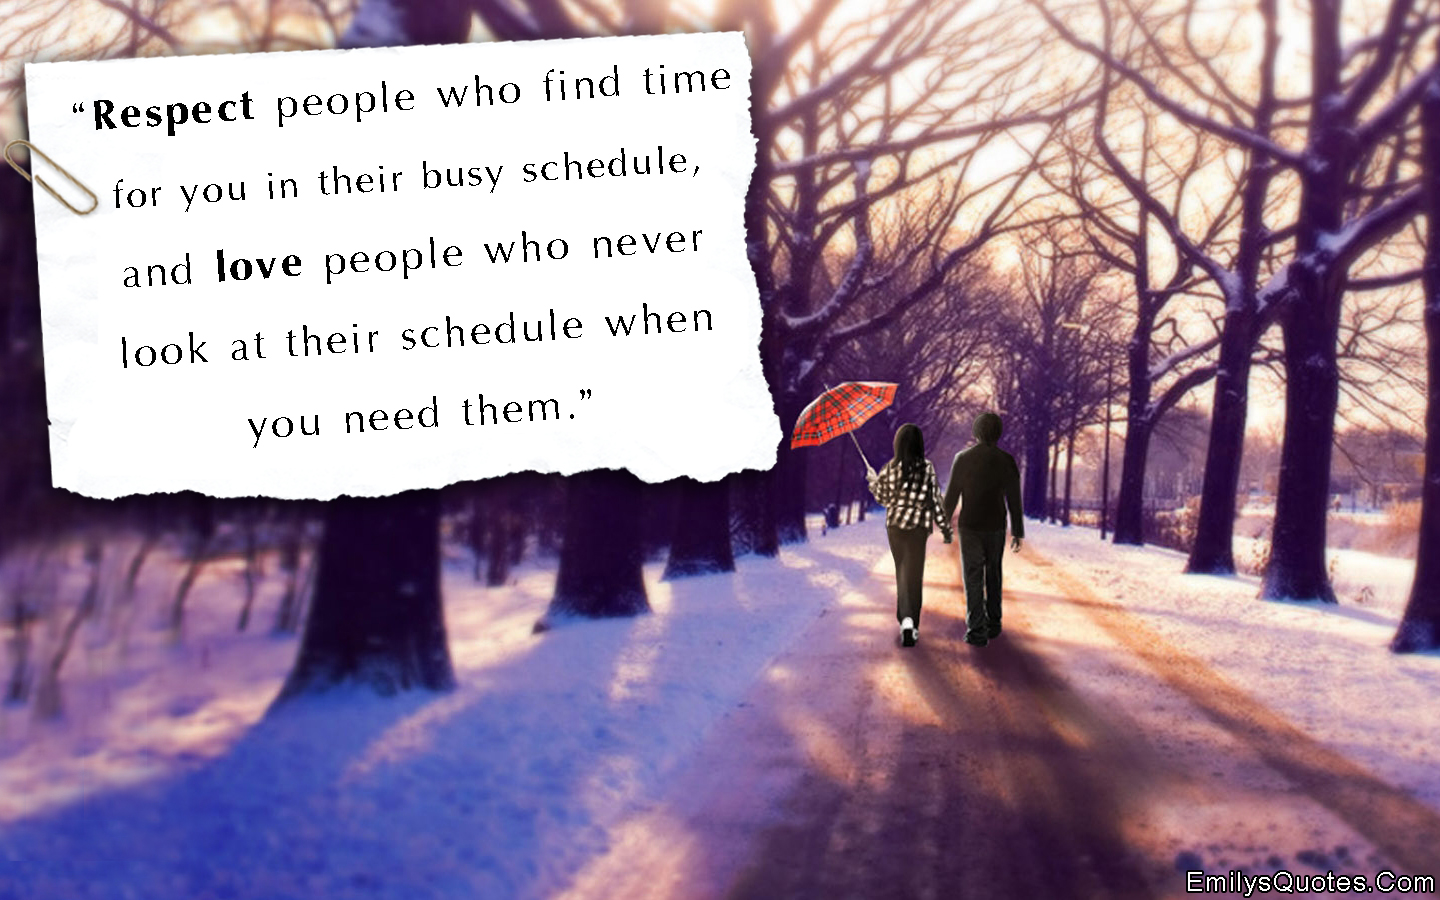 Respect people who find time for you in their busy schedule, and love people who never look at their schedule when you need them